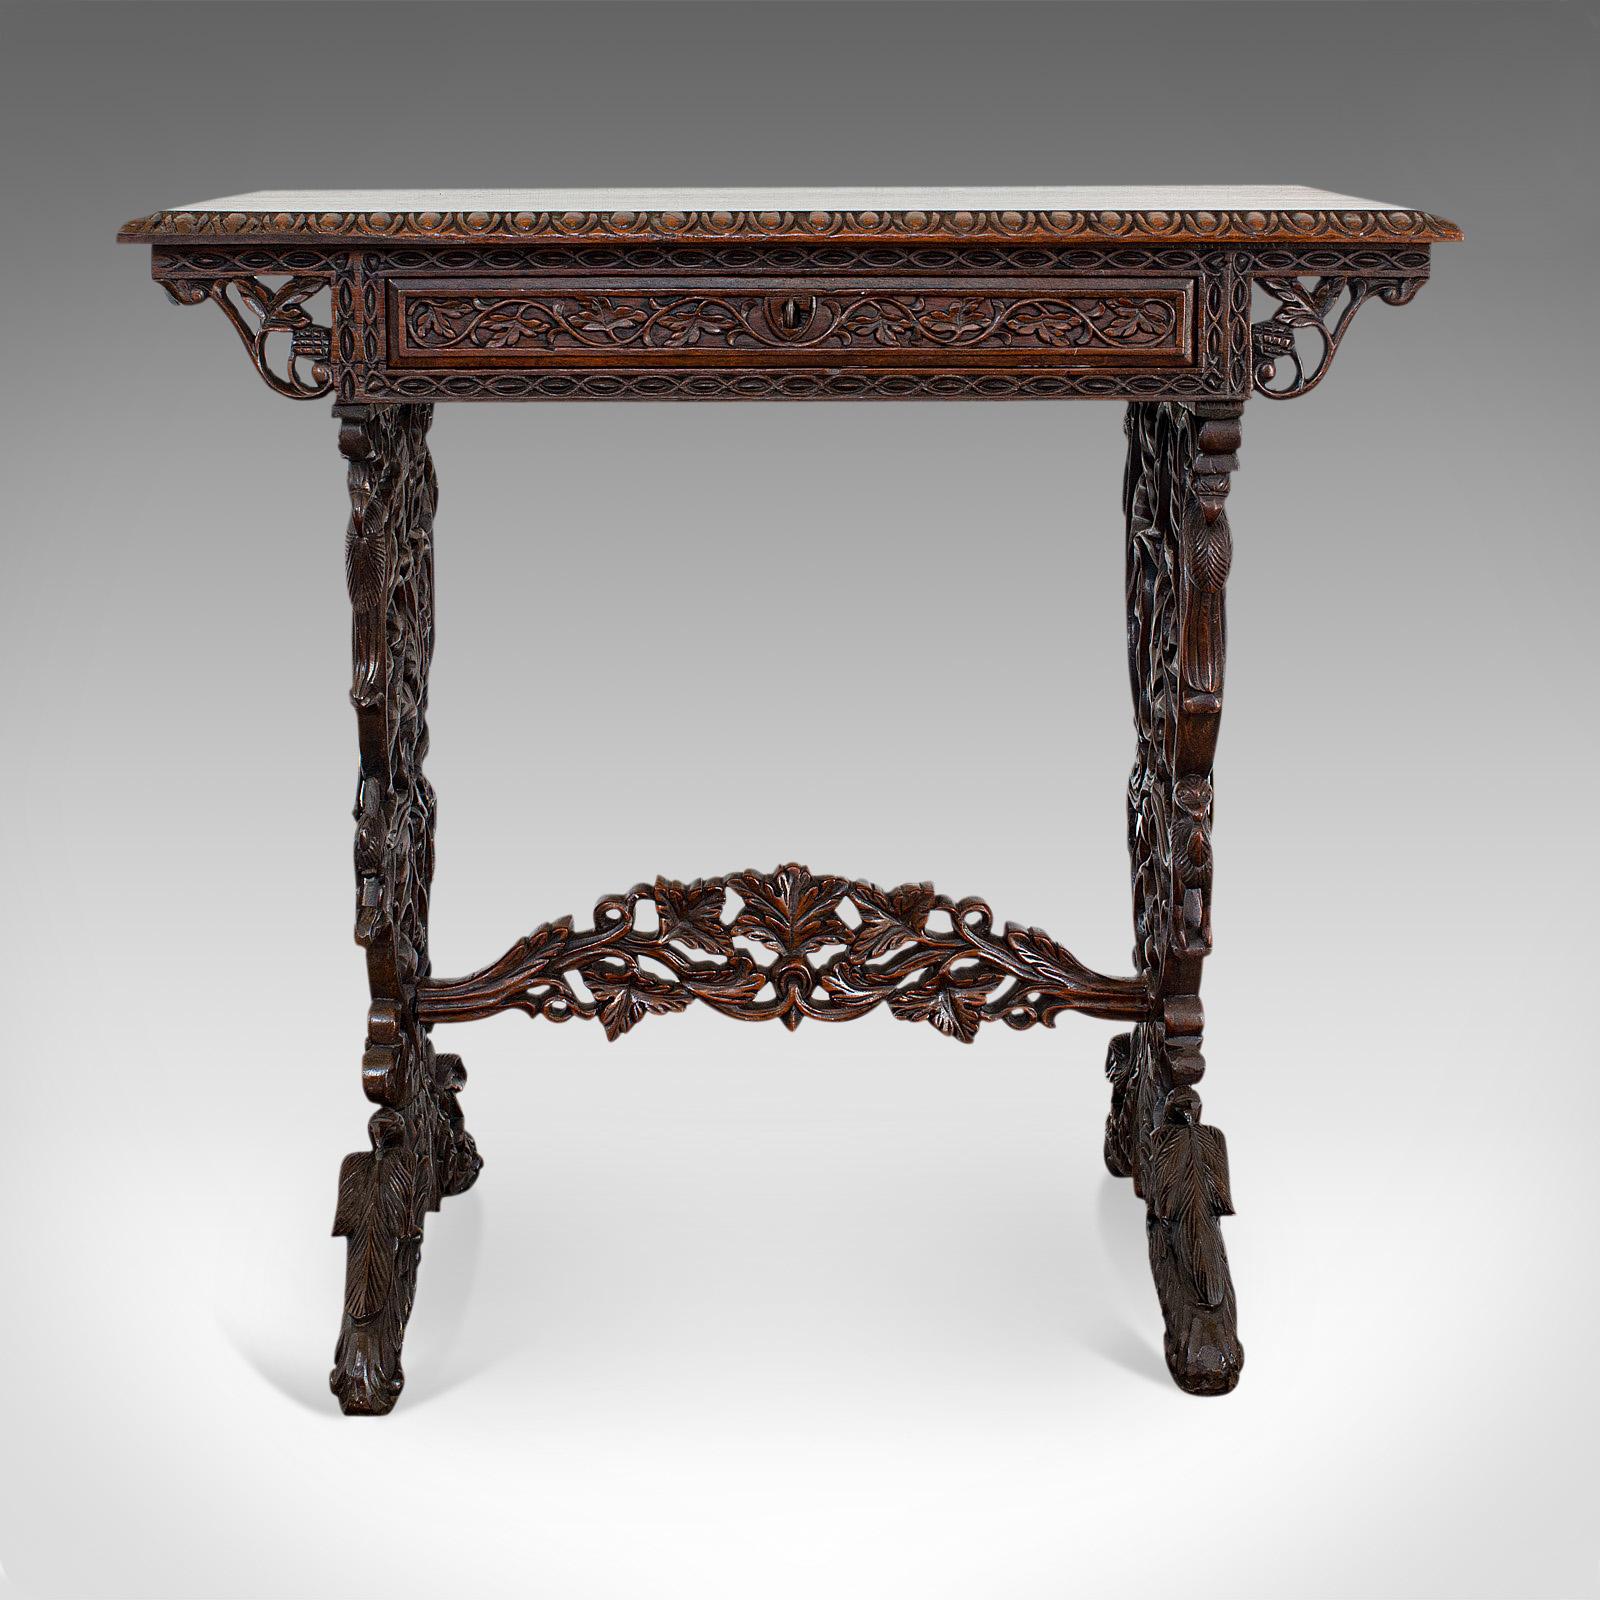 This is an antique small writing desk. An Asian, rosewood side or lamp tale dating to the early Victorian period, circa 1850.

Rare and hugely ornate and striking small desk
Displays a desirable aged patina
Rosewood resplendent with fine grain